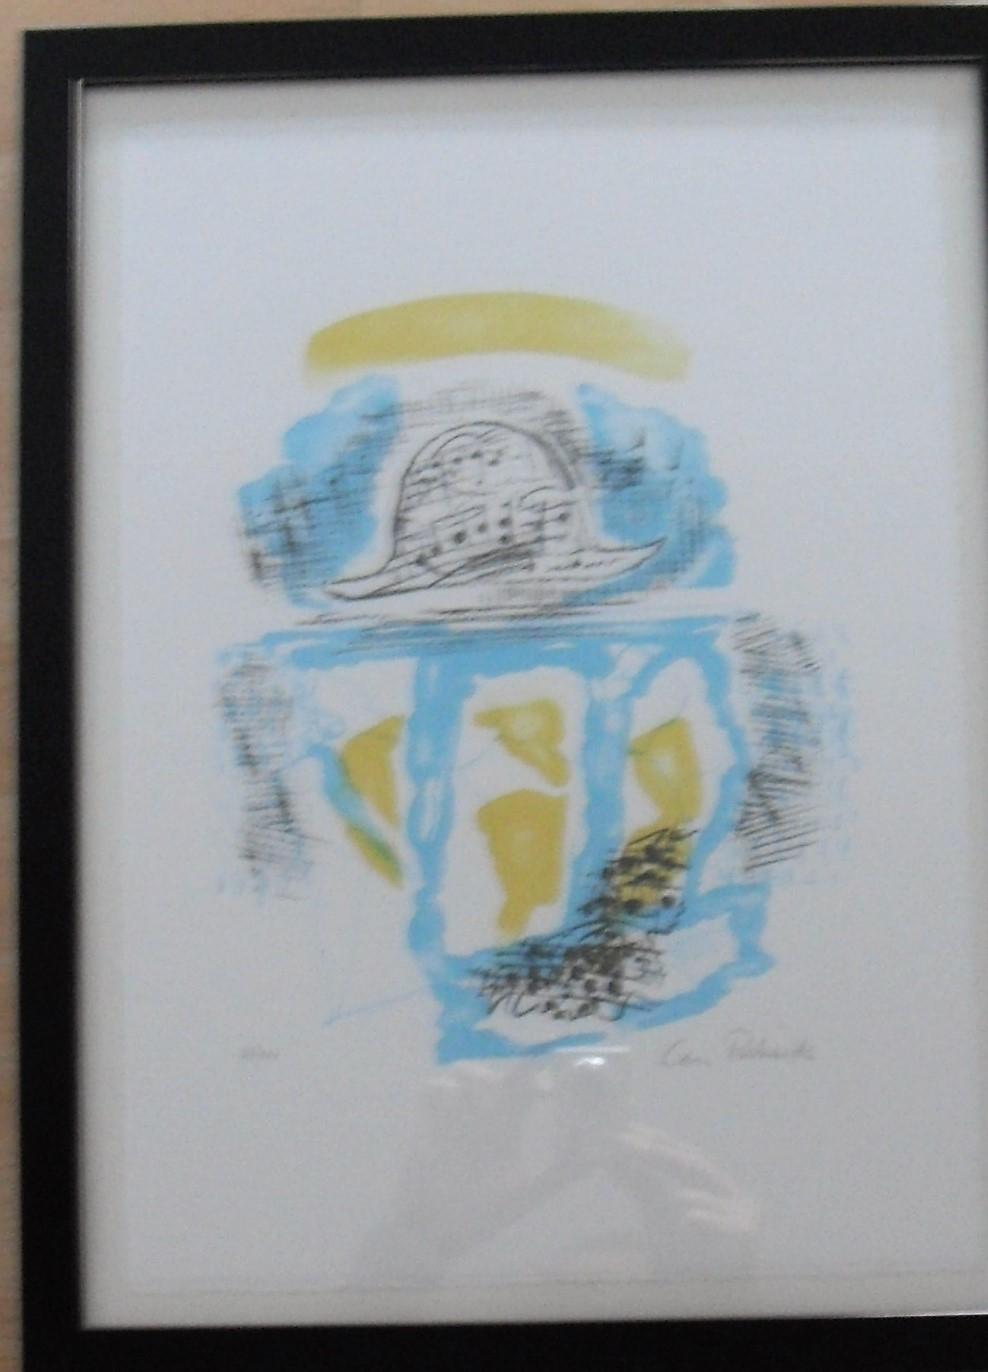 Ceri Richards, IMPROVISATION NO.9 UPON THE DAWN, lithograph on paper, 85/100, part of Journey - Image 2 of 4